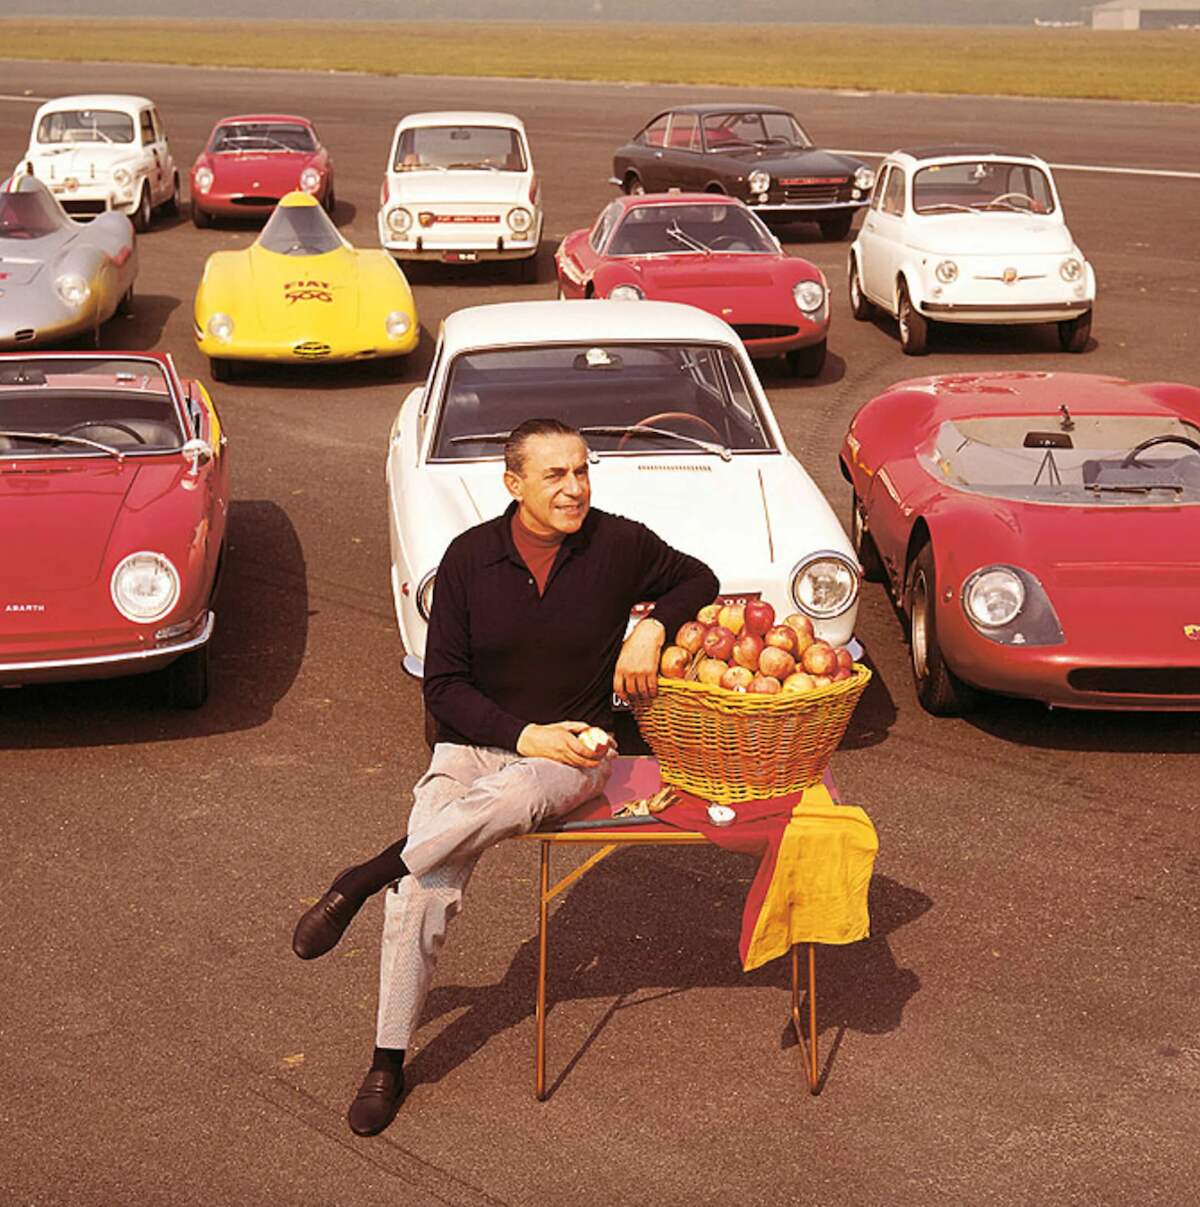 Carlo Abarth sitting in front a collection of cars he designed.